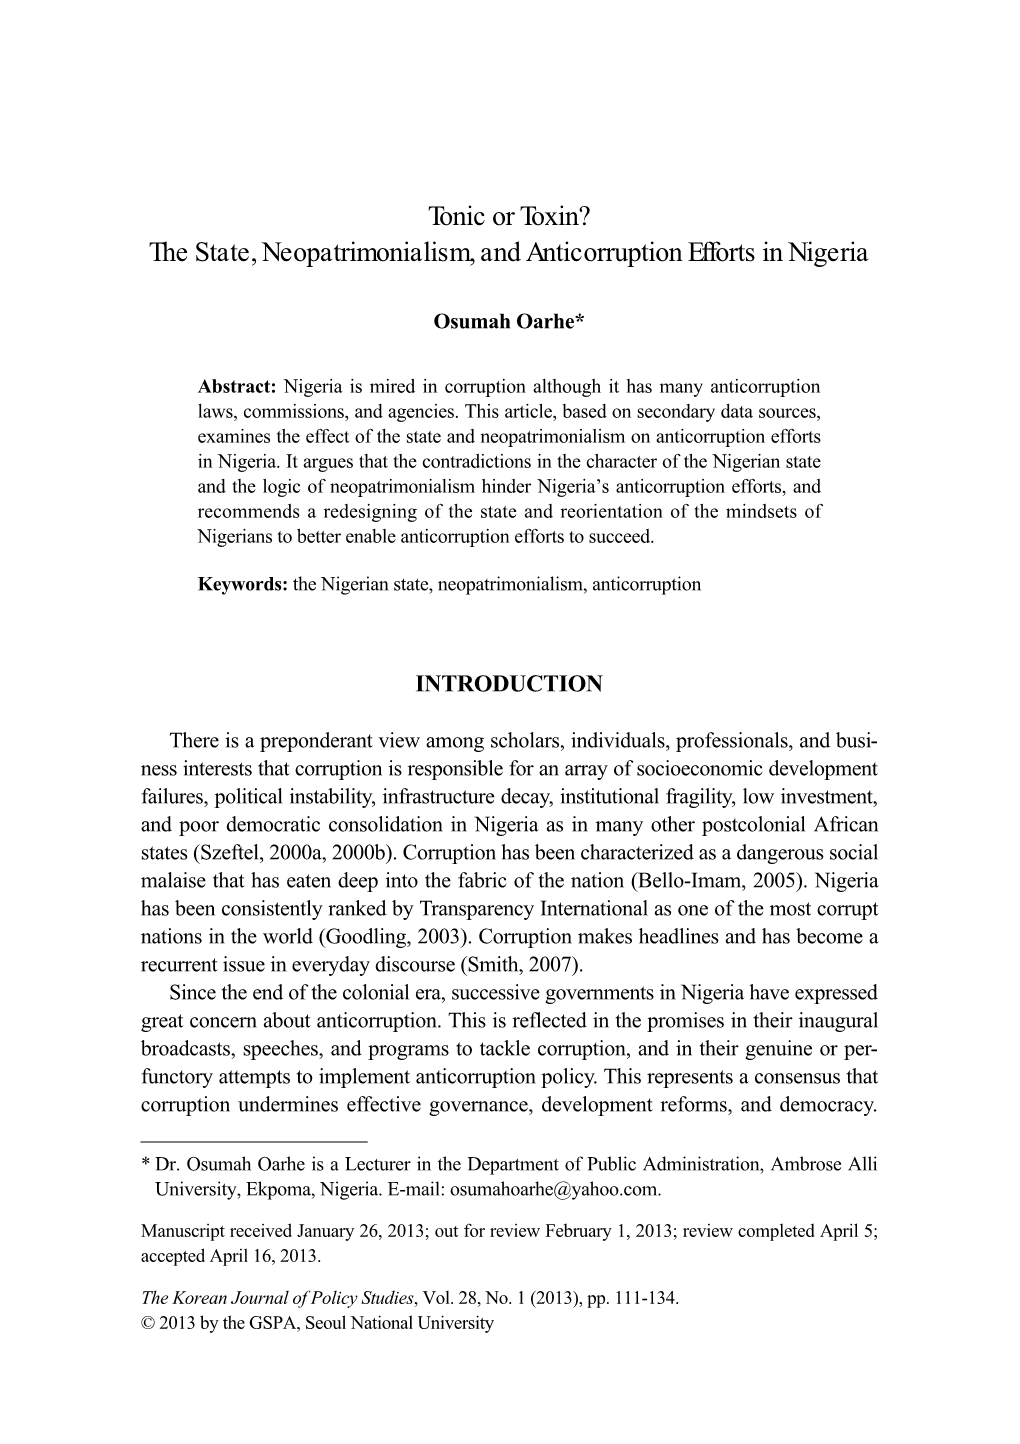 The State, Neopatrimonialism, and Anticorruption Efforts in Nigeria